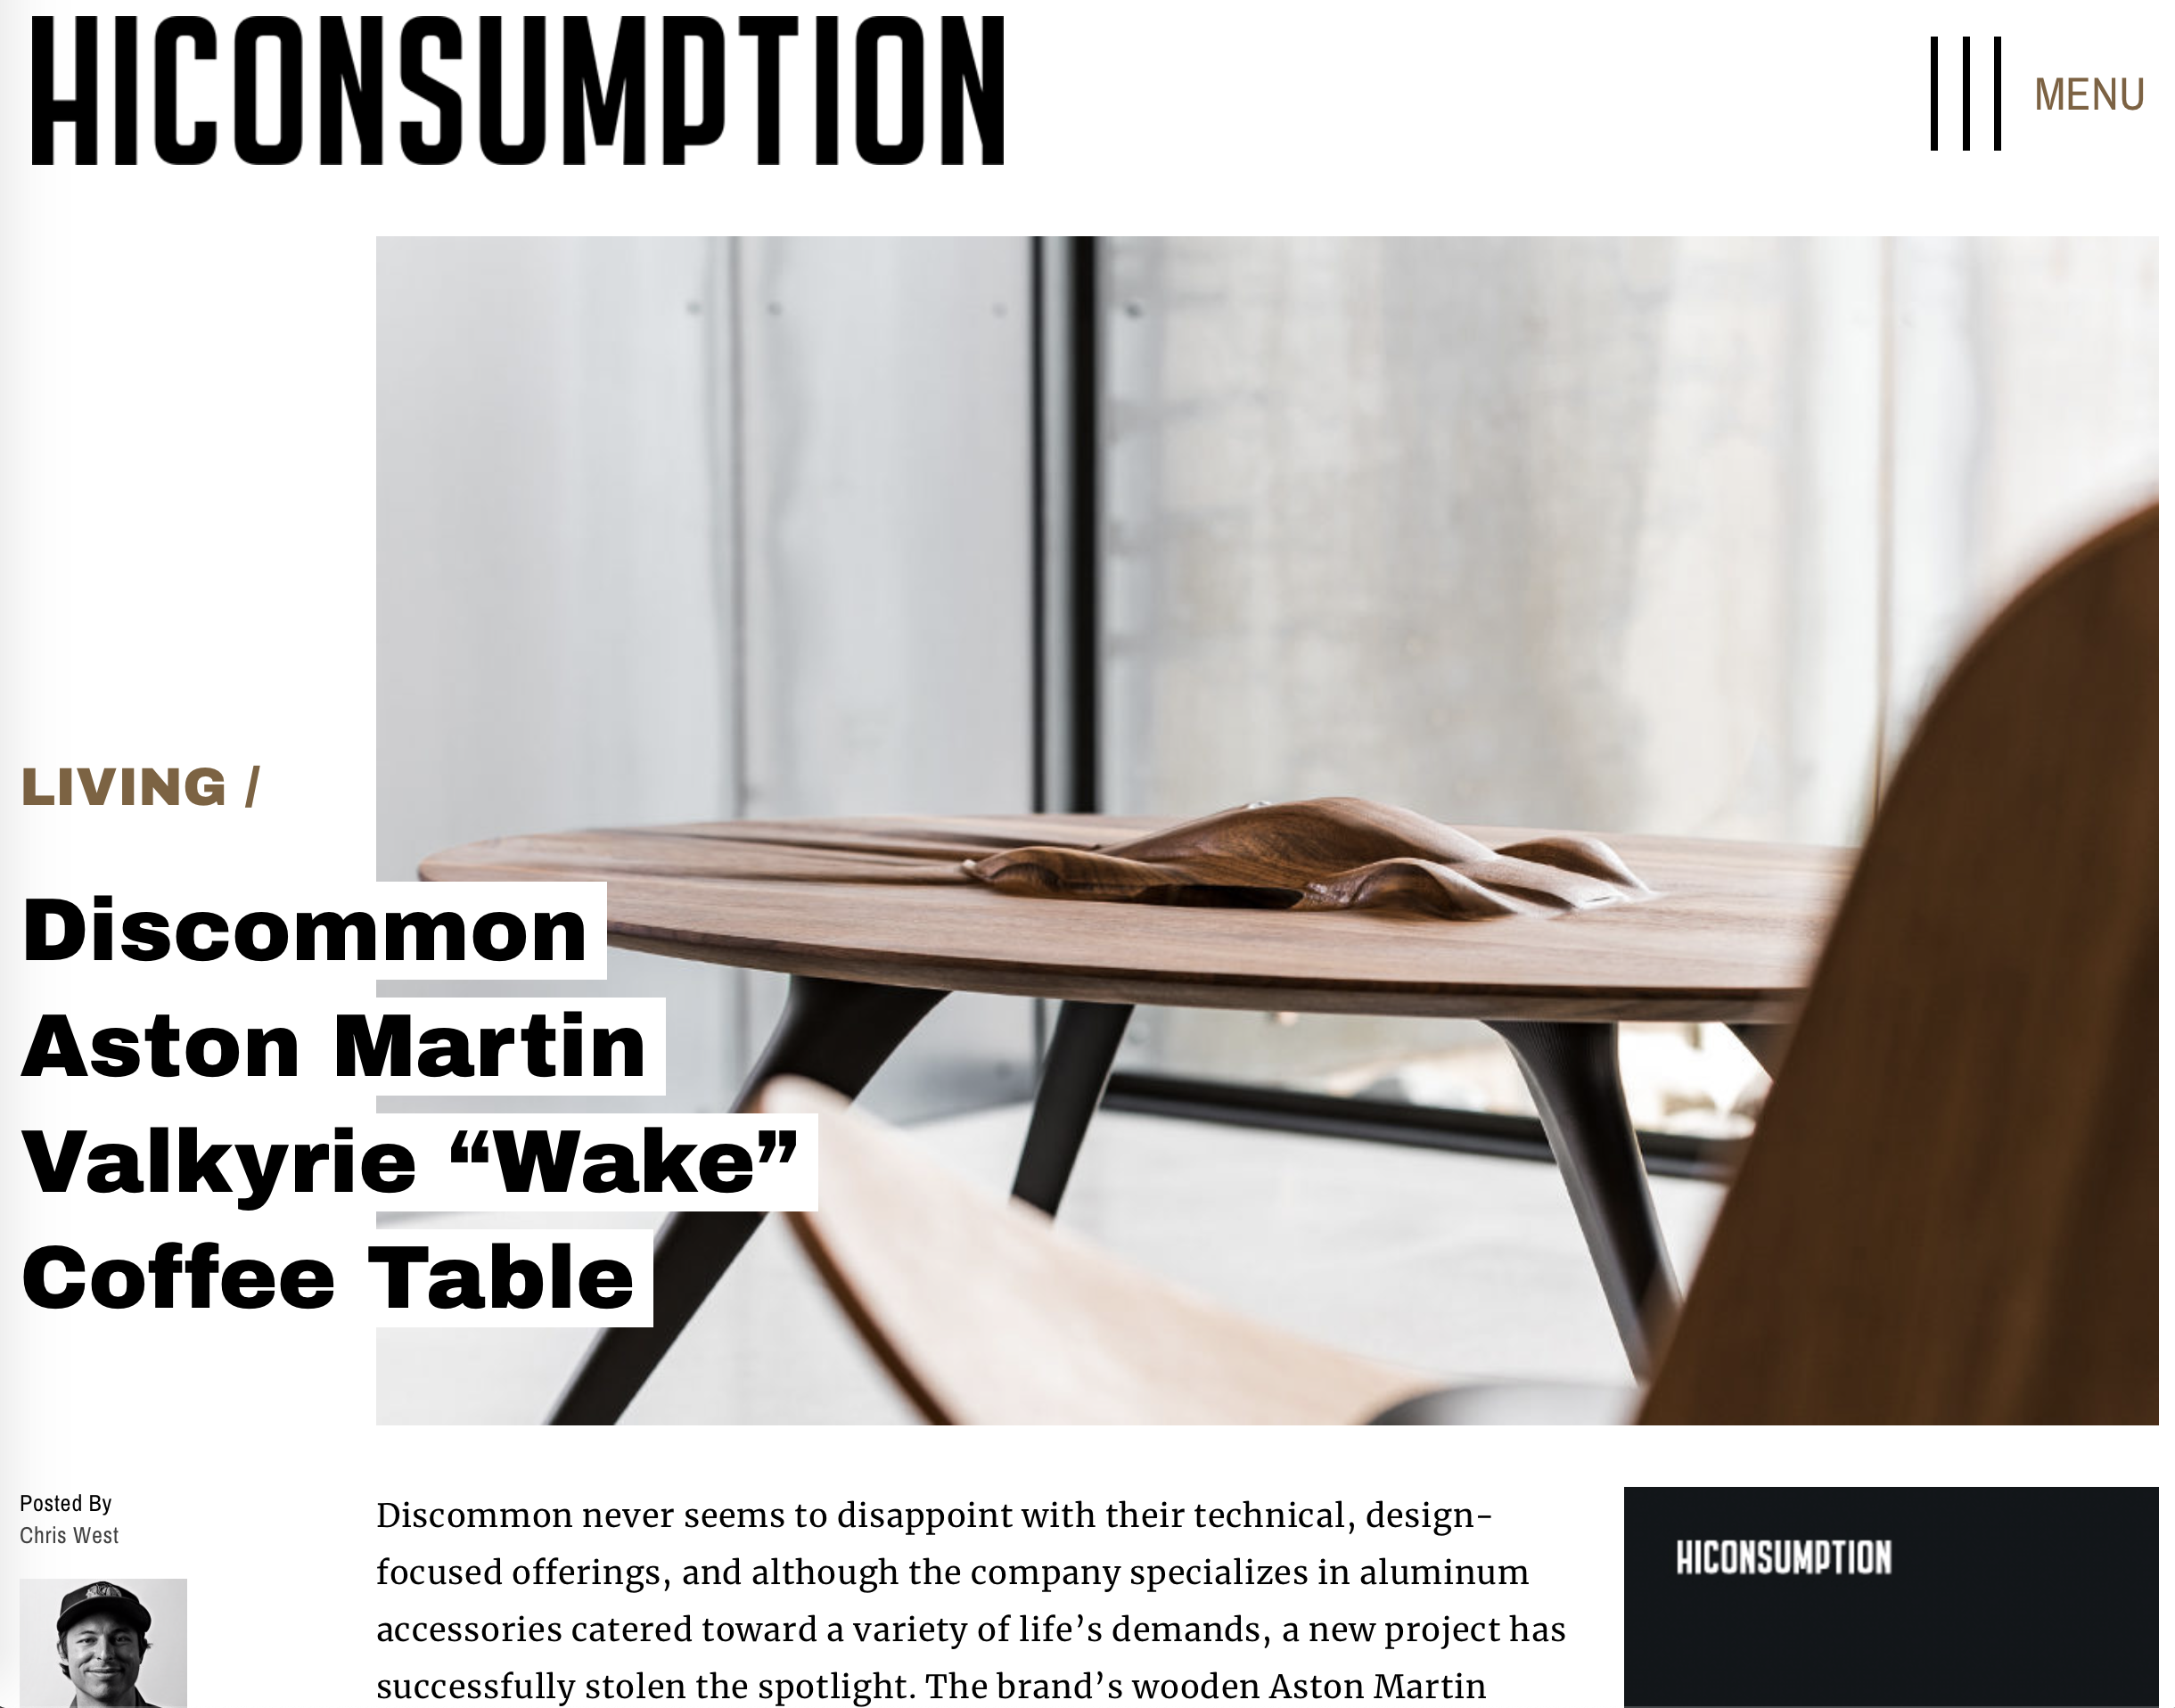 high consumption features Discommon car table